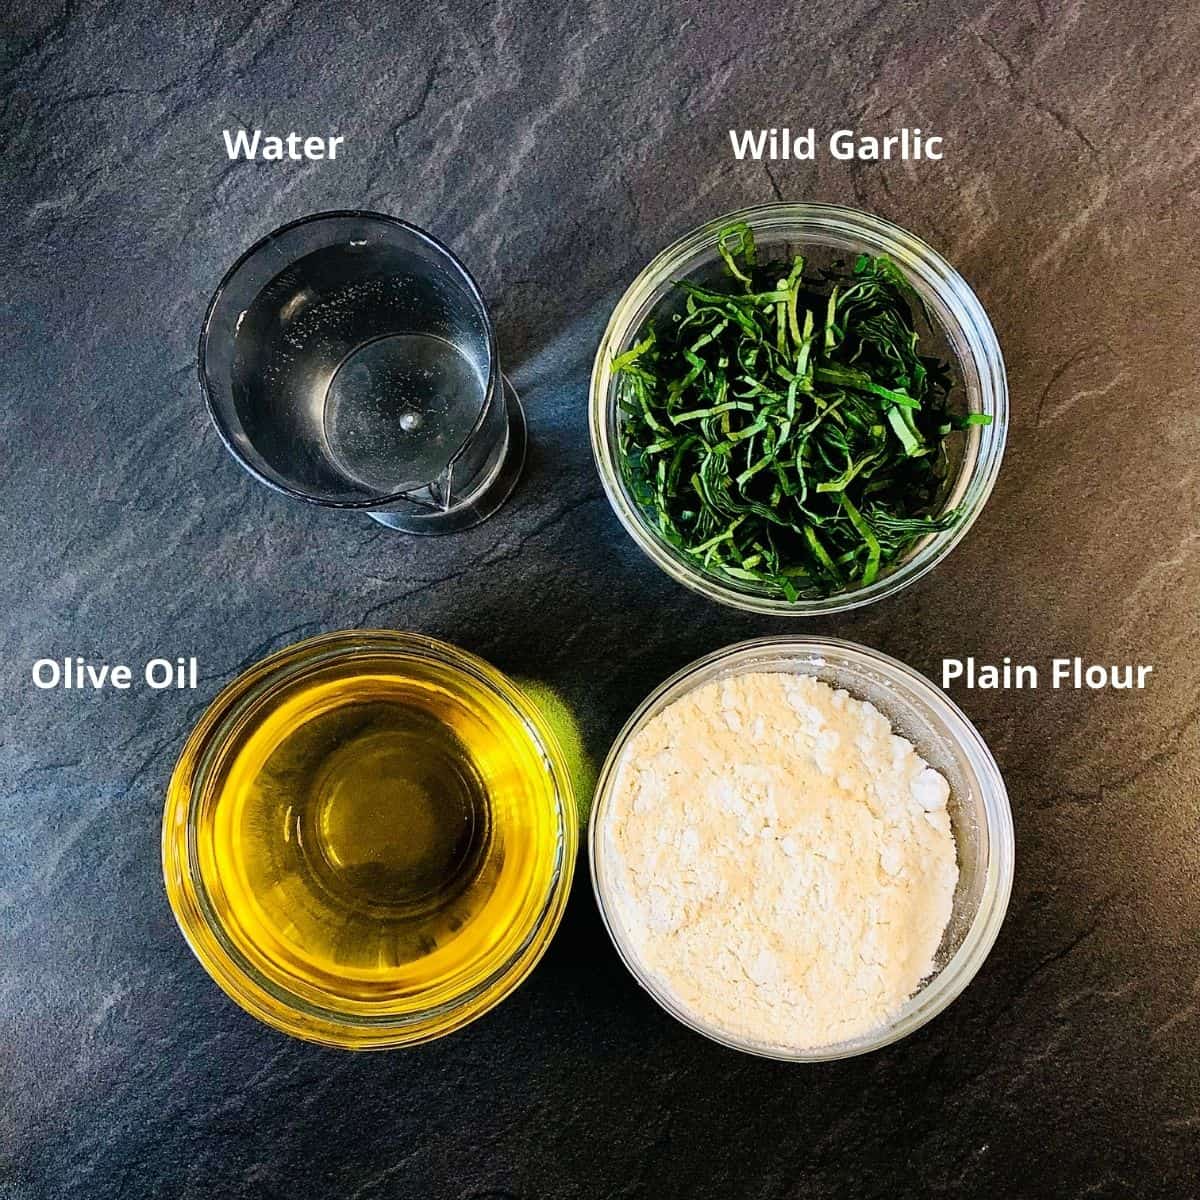 Ingredients for wild garlic laccha paratha in small glass dishes. Annotated.